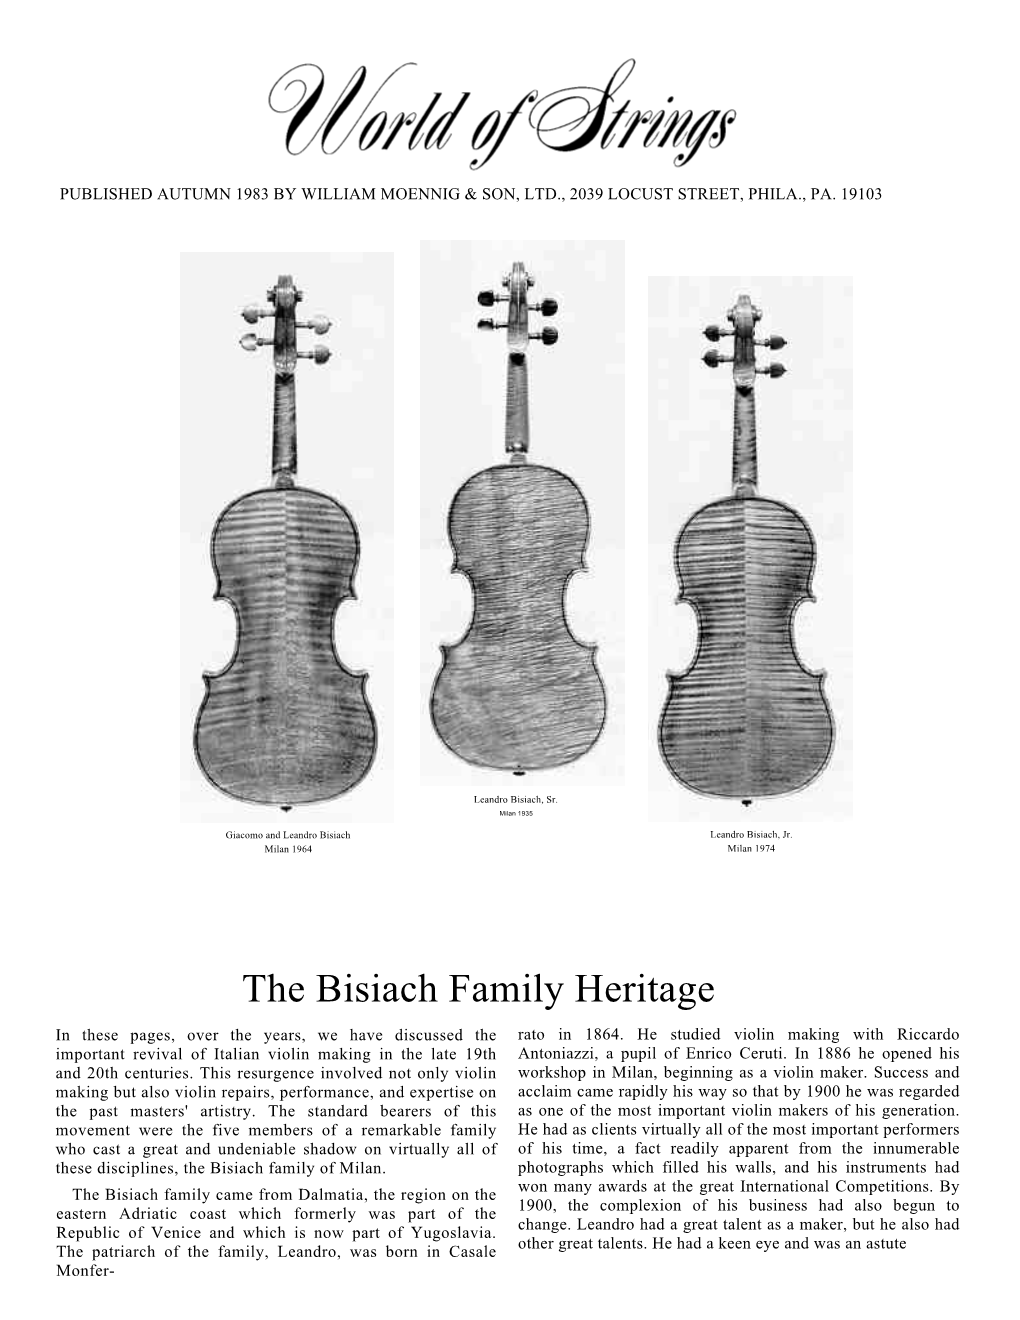 The Bisiach Family Heritage